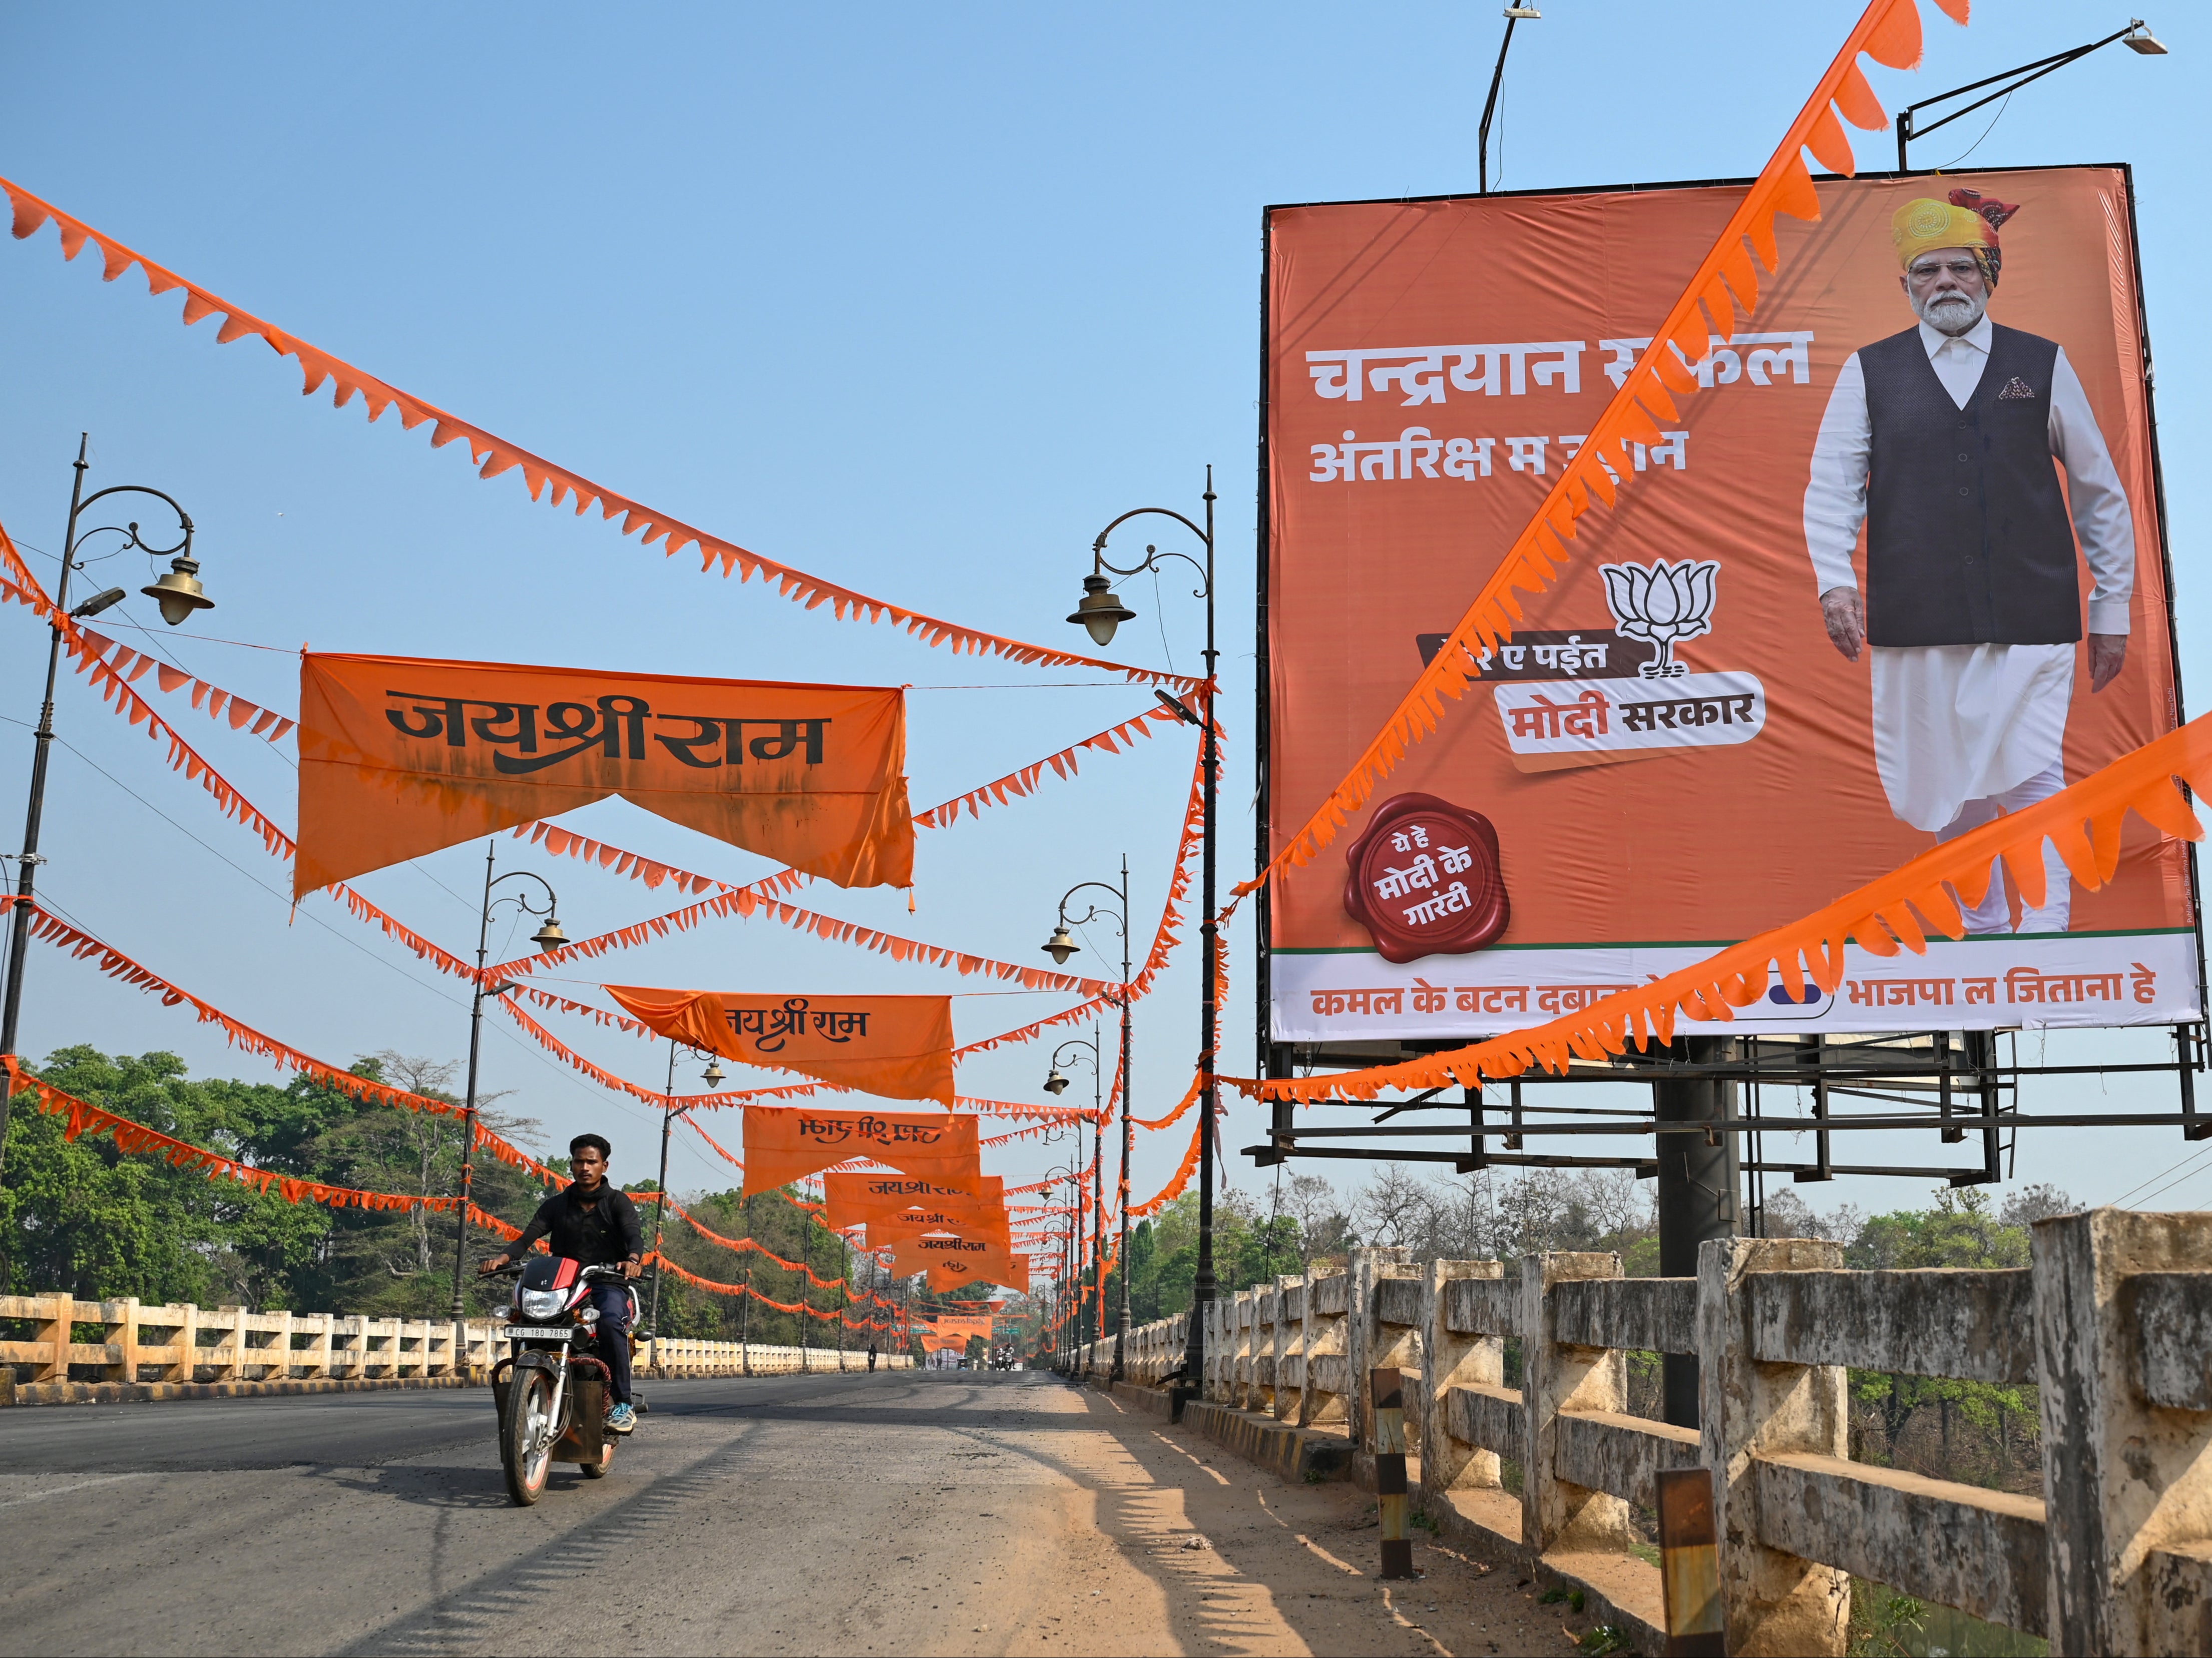 A motorcyclist drives past a poster of India’s prime minister Narendra Modi in Dantewada, Chhattisgarh, ahead of India’s national election